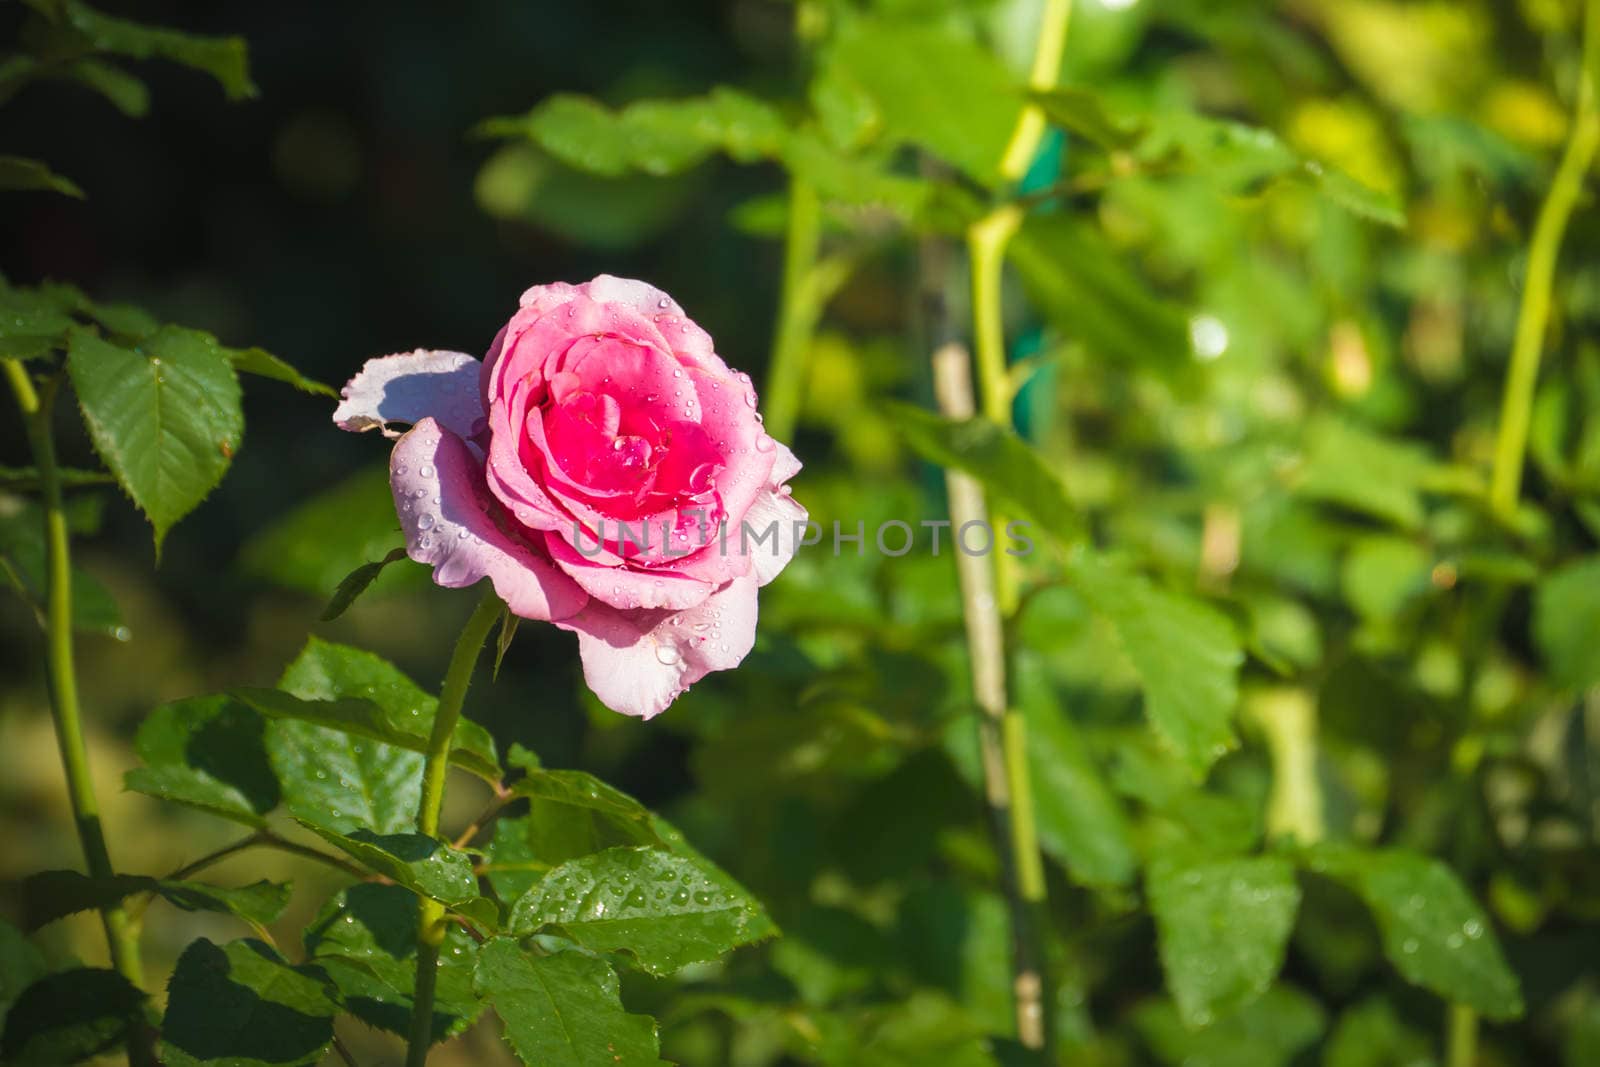 Roses in the garden filtered, Roses are beautiful with a beautiful sunny day.